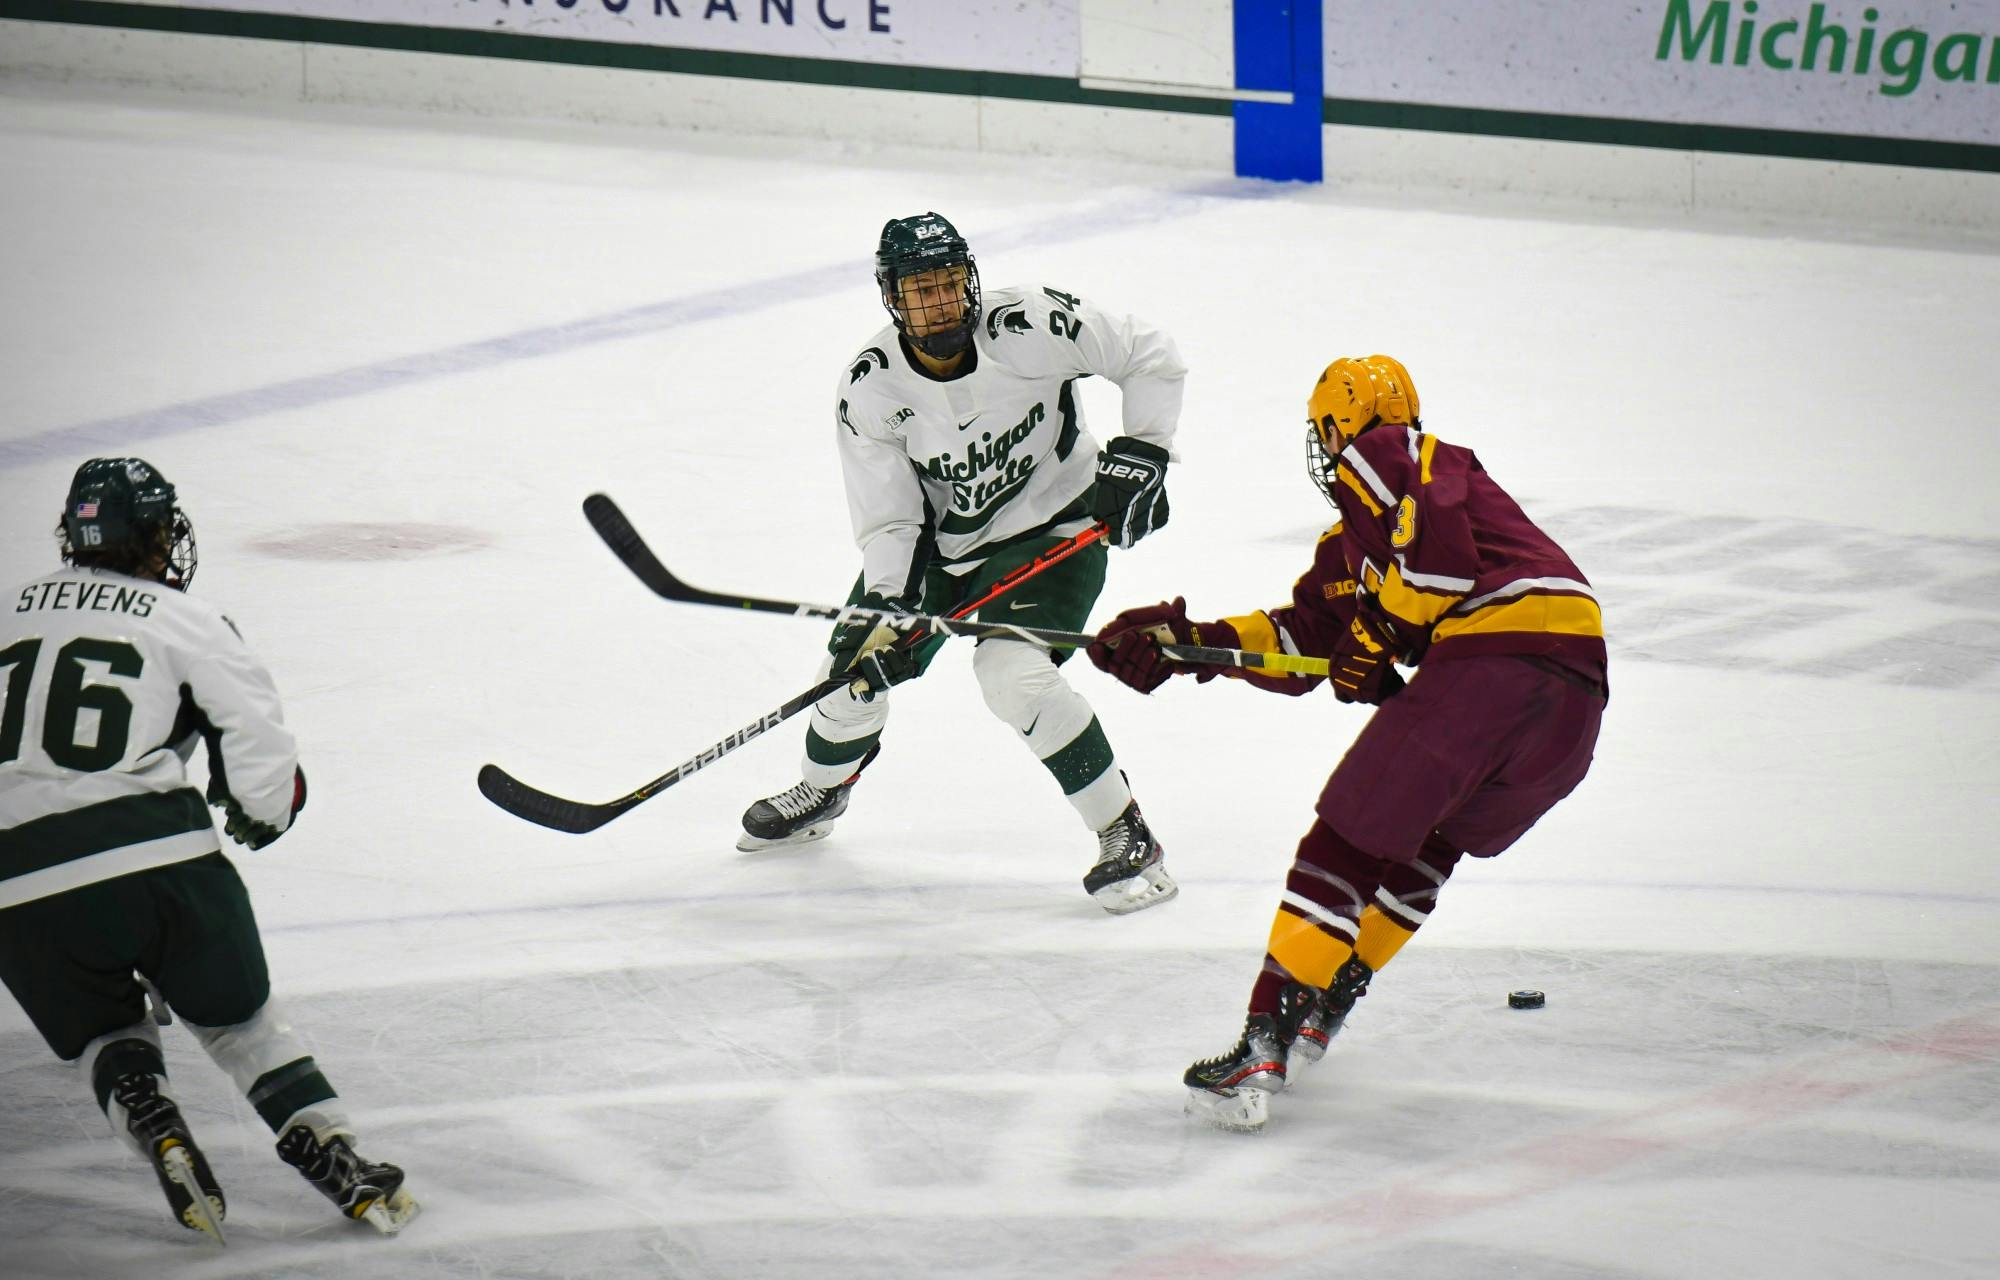 <p>Junior forward Austin Kamer (24) makes a pass during the hockey game against Minnesota at the Munn Ice Arena on Jan. 10. The Spartans defeated the Golden Gophers 4-1. </p>